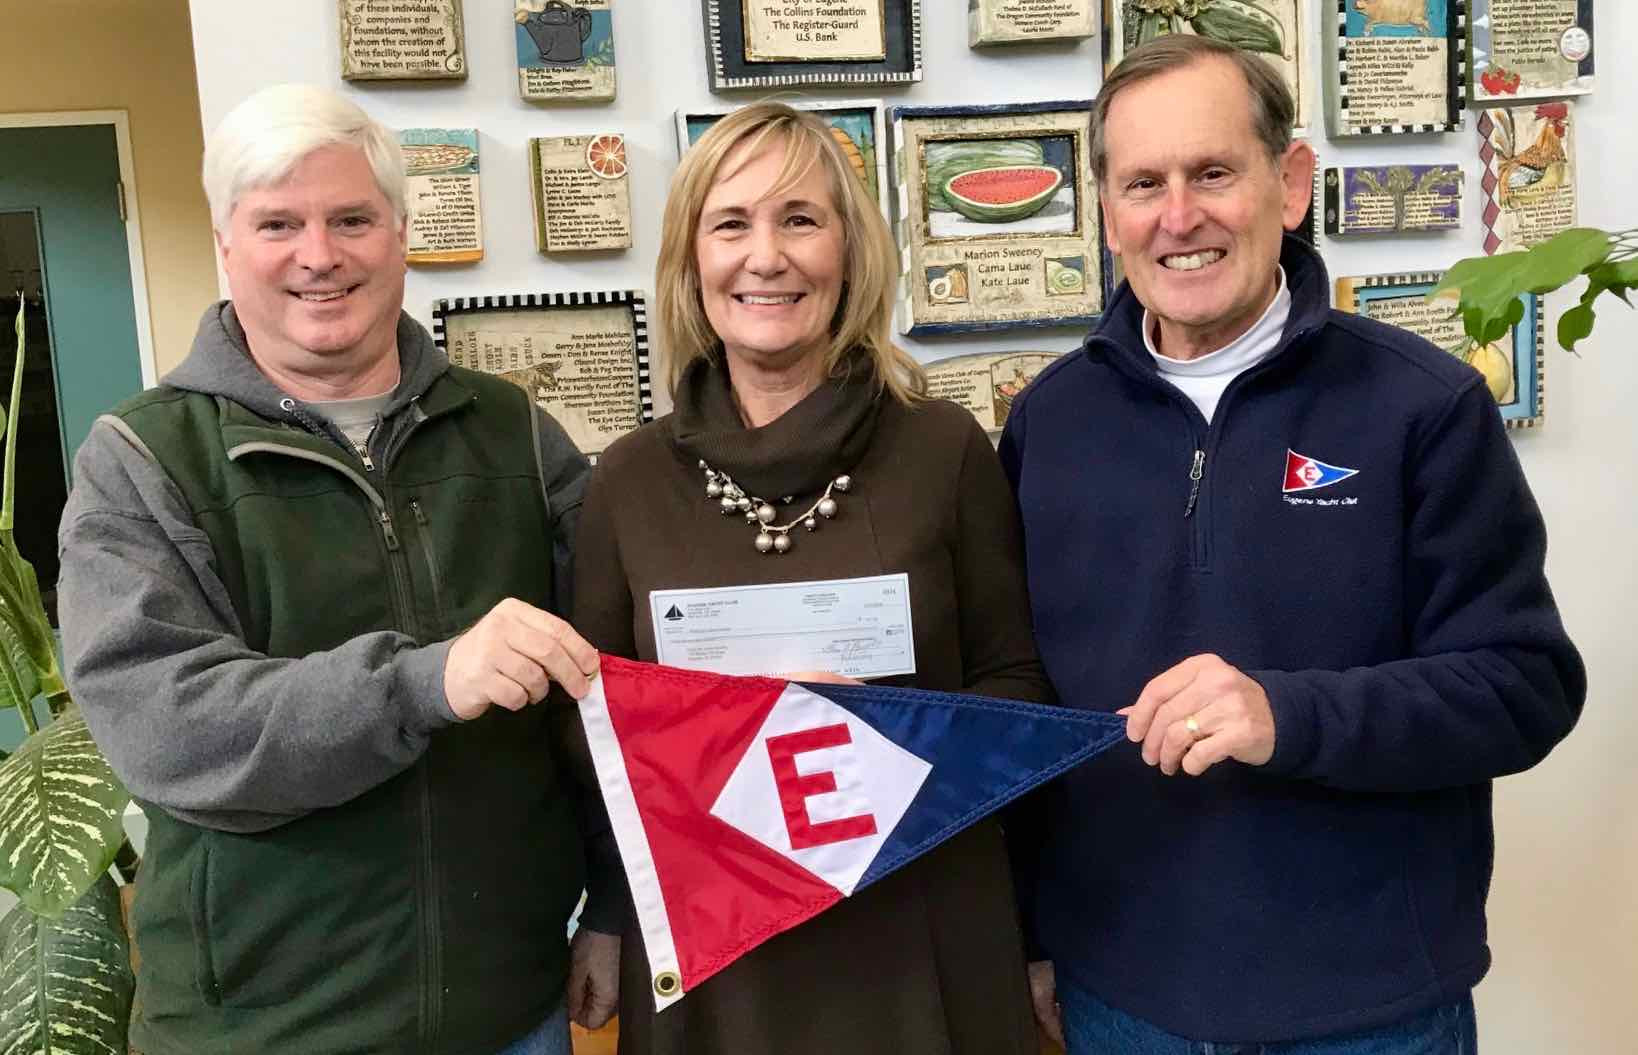  Club Manager Rich Aaring (left) and Rear Commodore Gary Powell (right) present a check and the EYC burgee to Food for Lane County’s Executive Director Beverlee Potter 